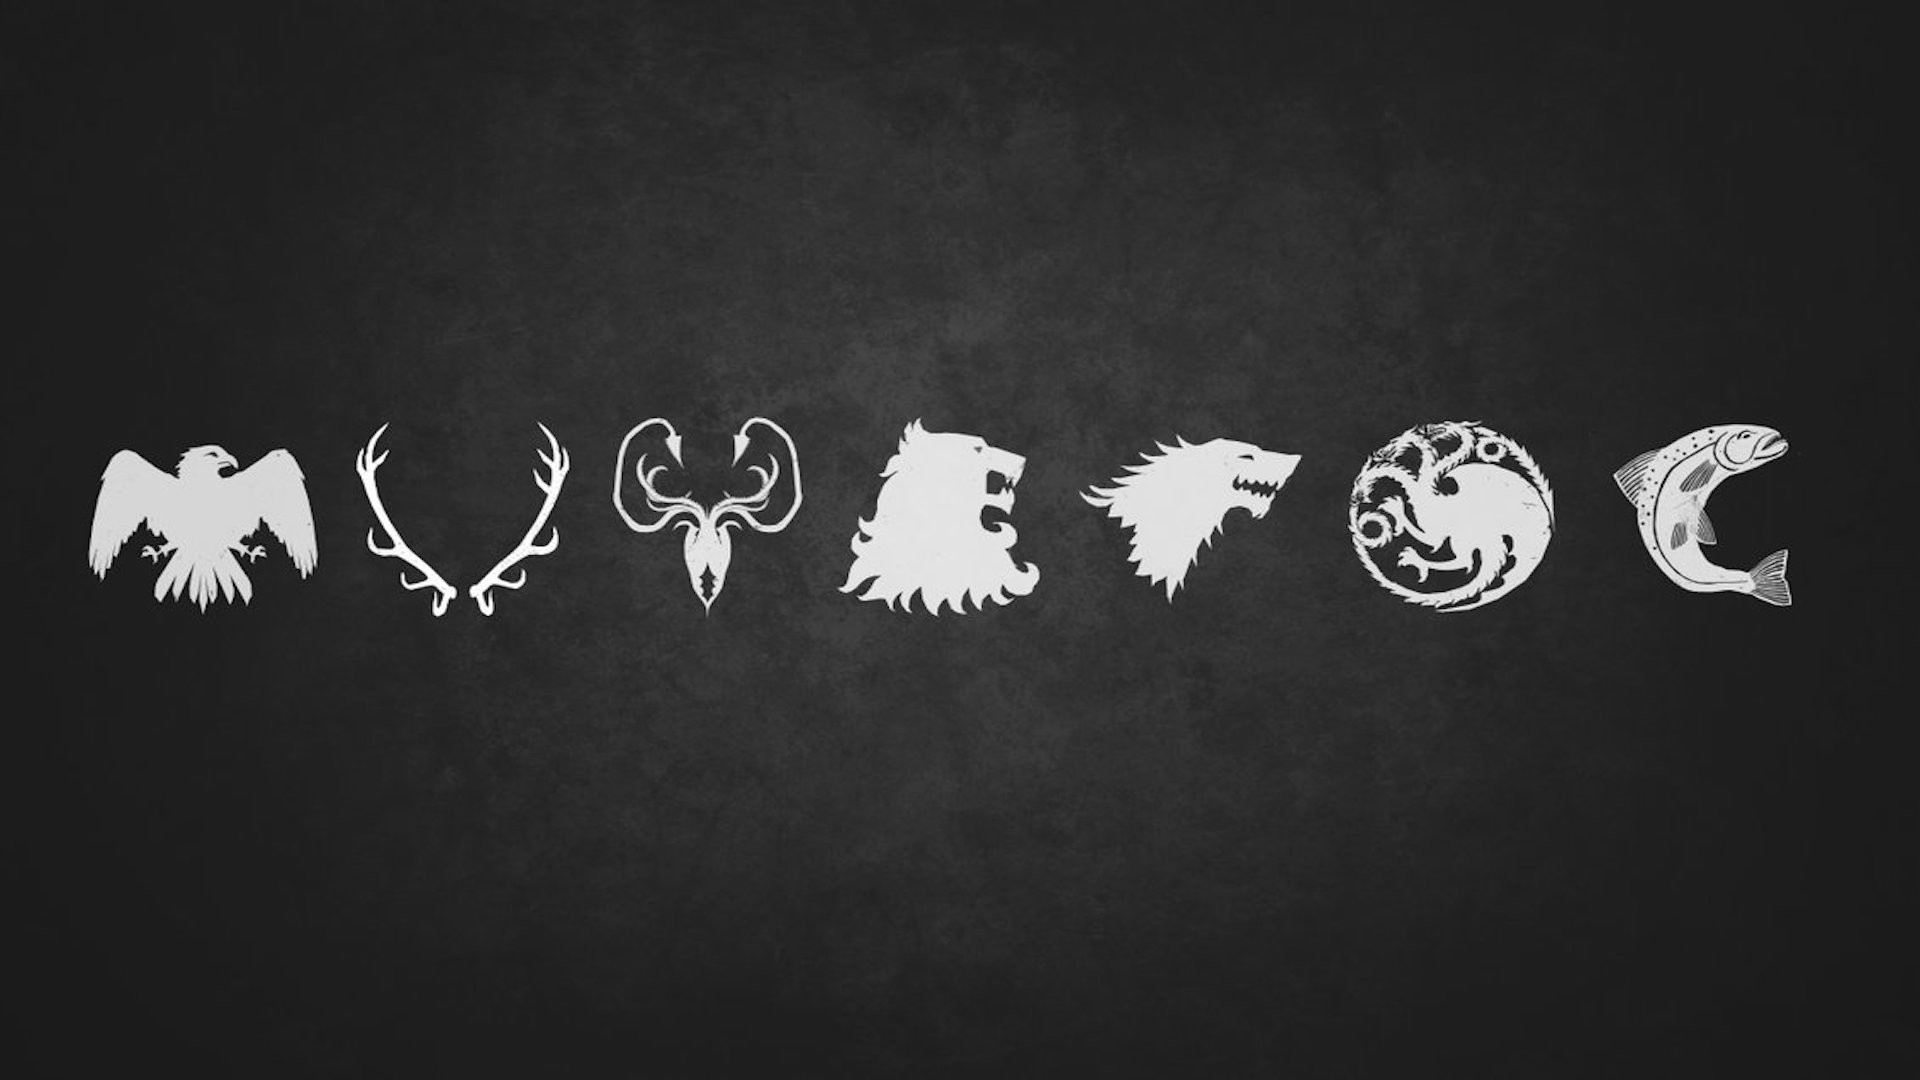 A Song Of Ice And Fire Computer Wallpapers, Desktop Backgrounds | 2050x1063  | ID:513534 | A song of ice and fire, Game of thrones art, Hbo game of  thrones